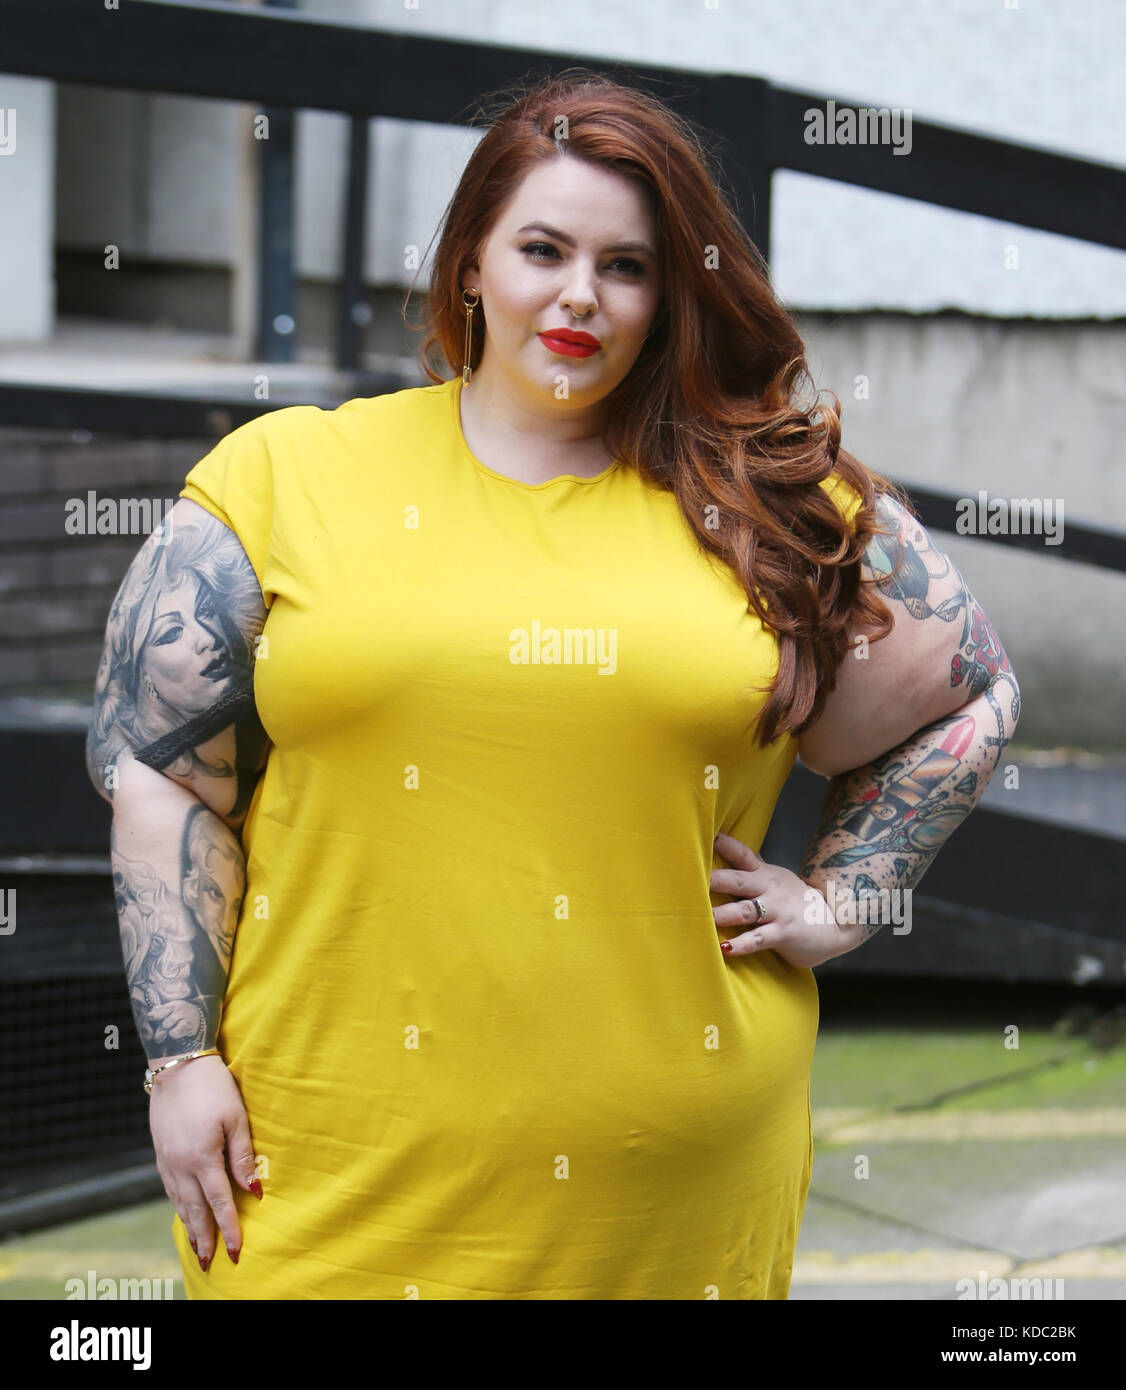 Tess Holliday outside ITV Studios Featuring: Tess Holliday Where ...